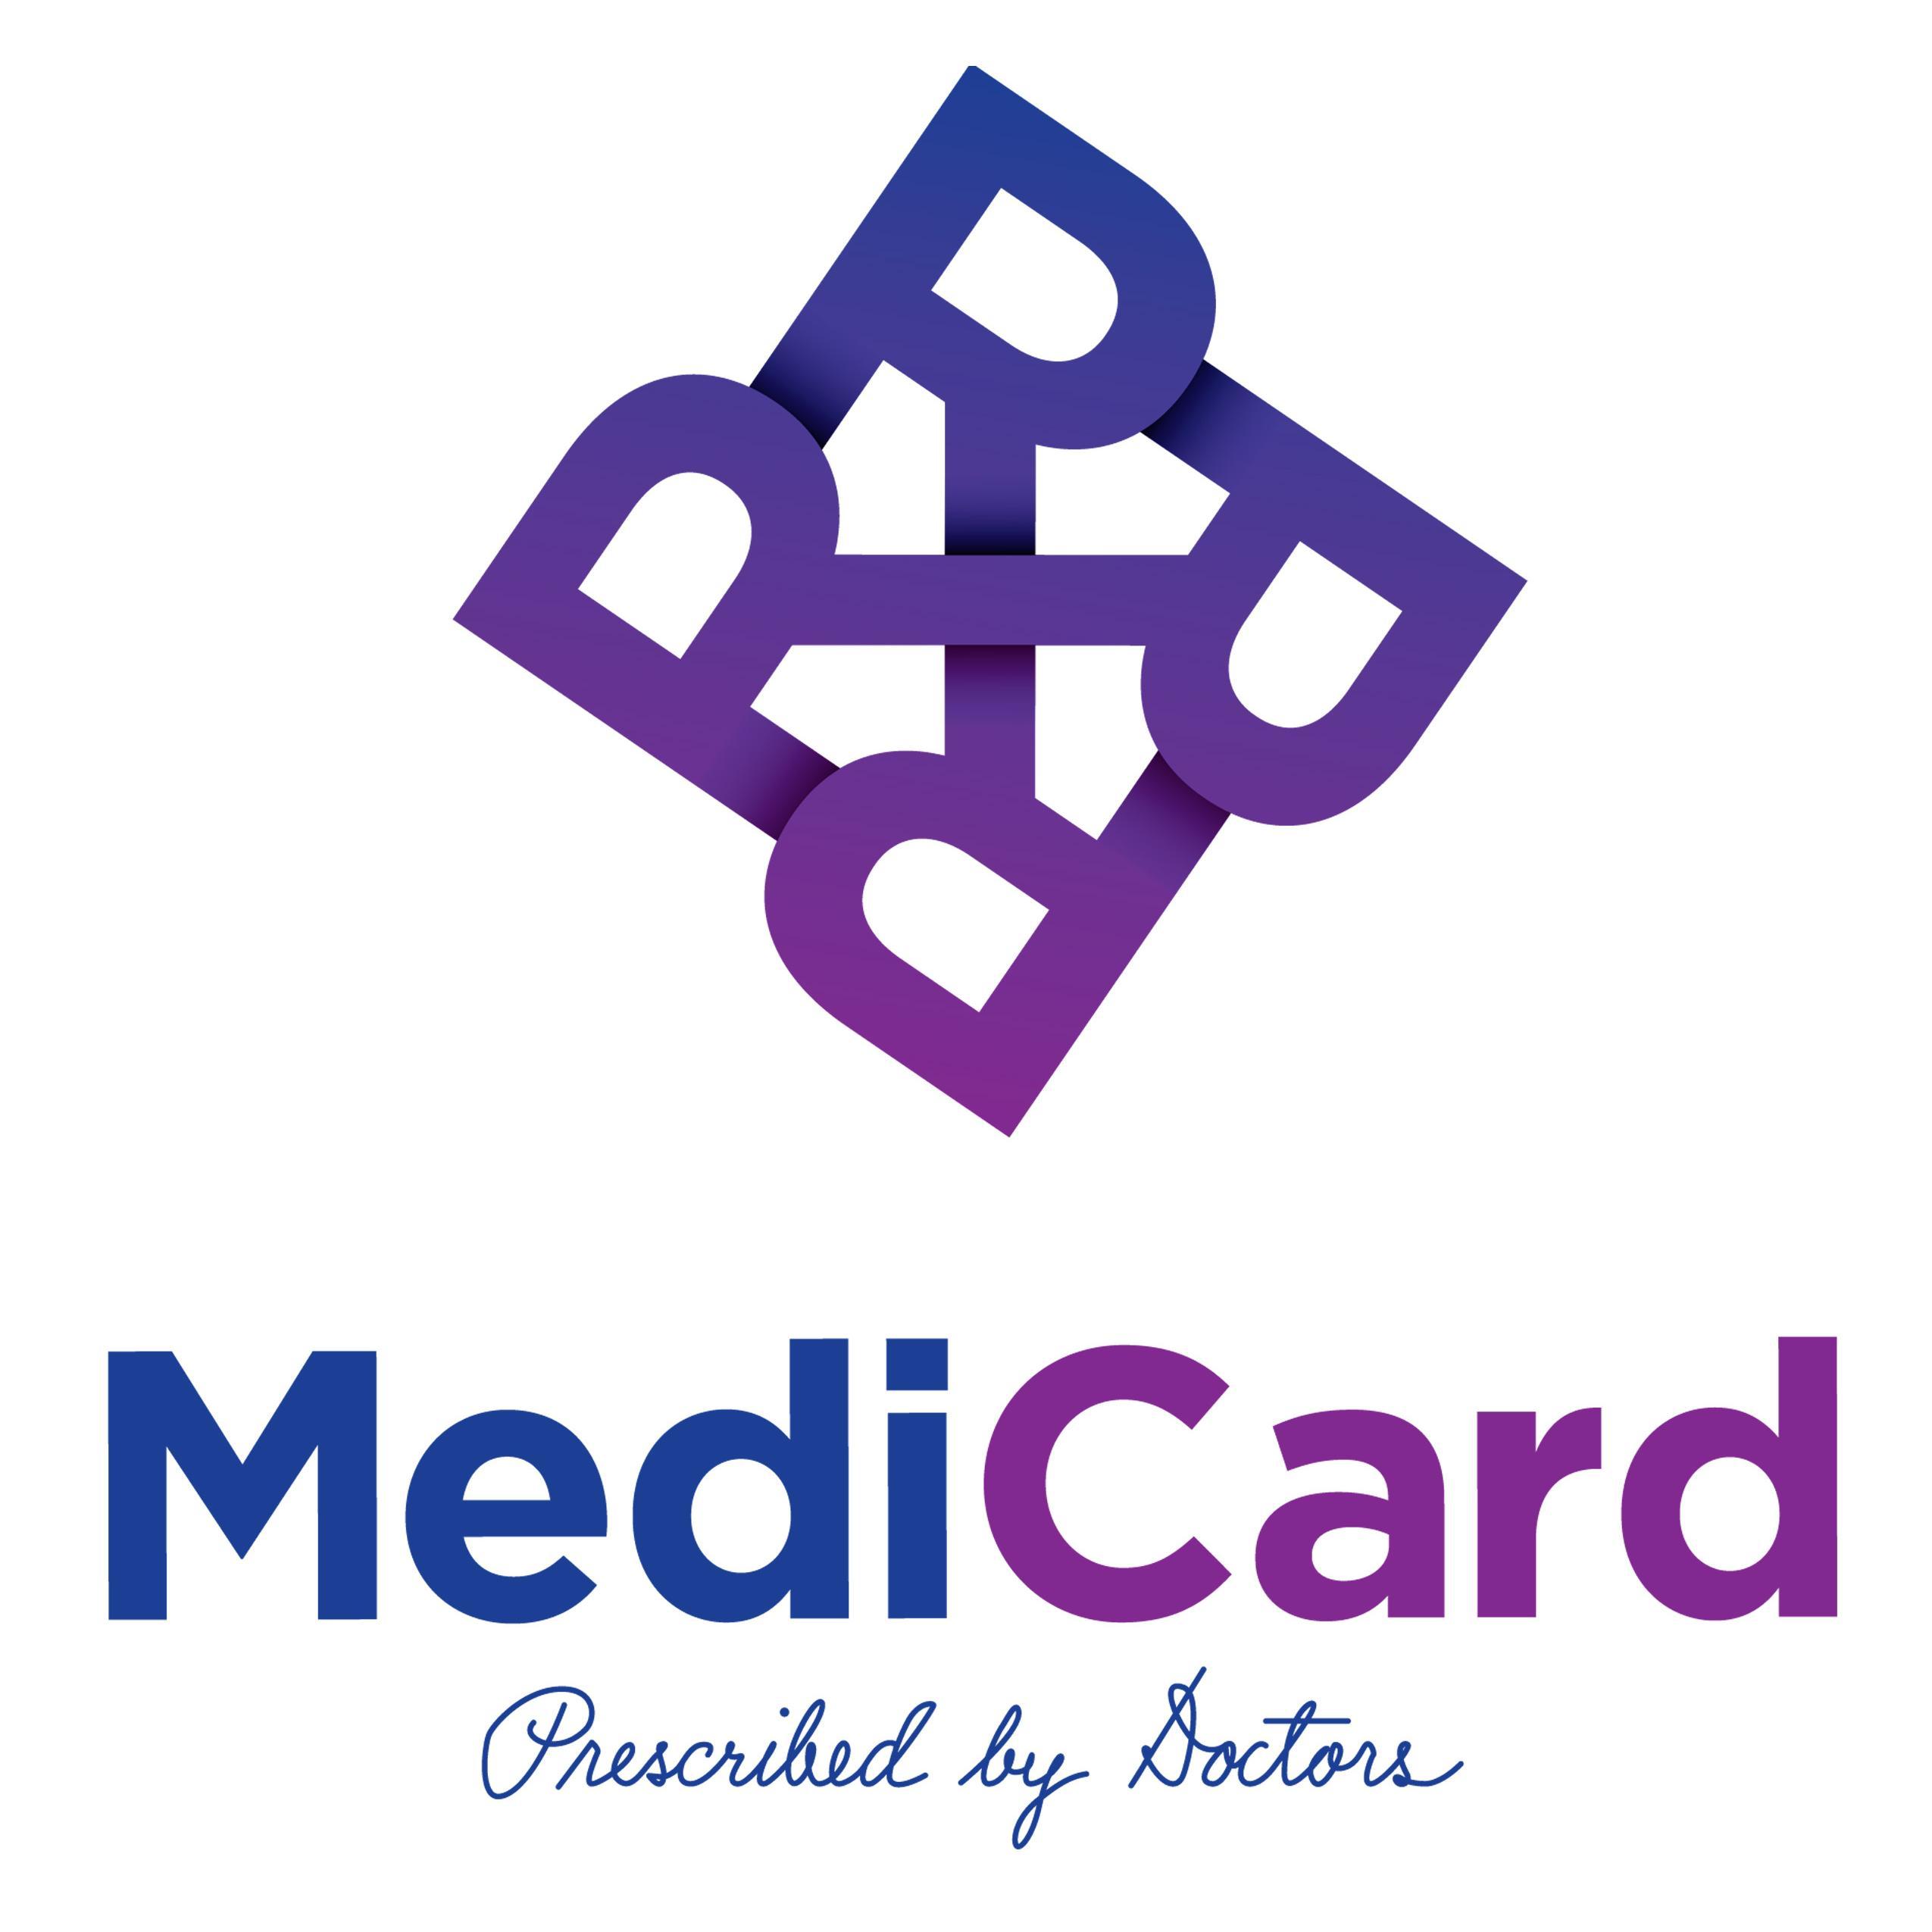 MediCard Philippines on Twitter: "Your boy's journey to manhood starts